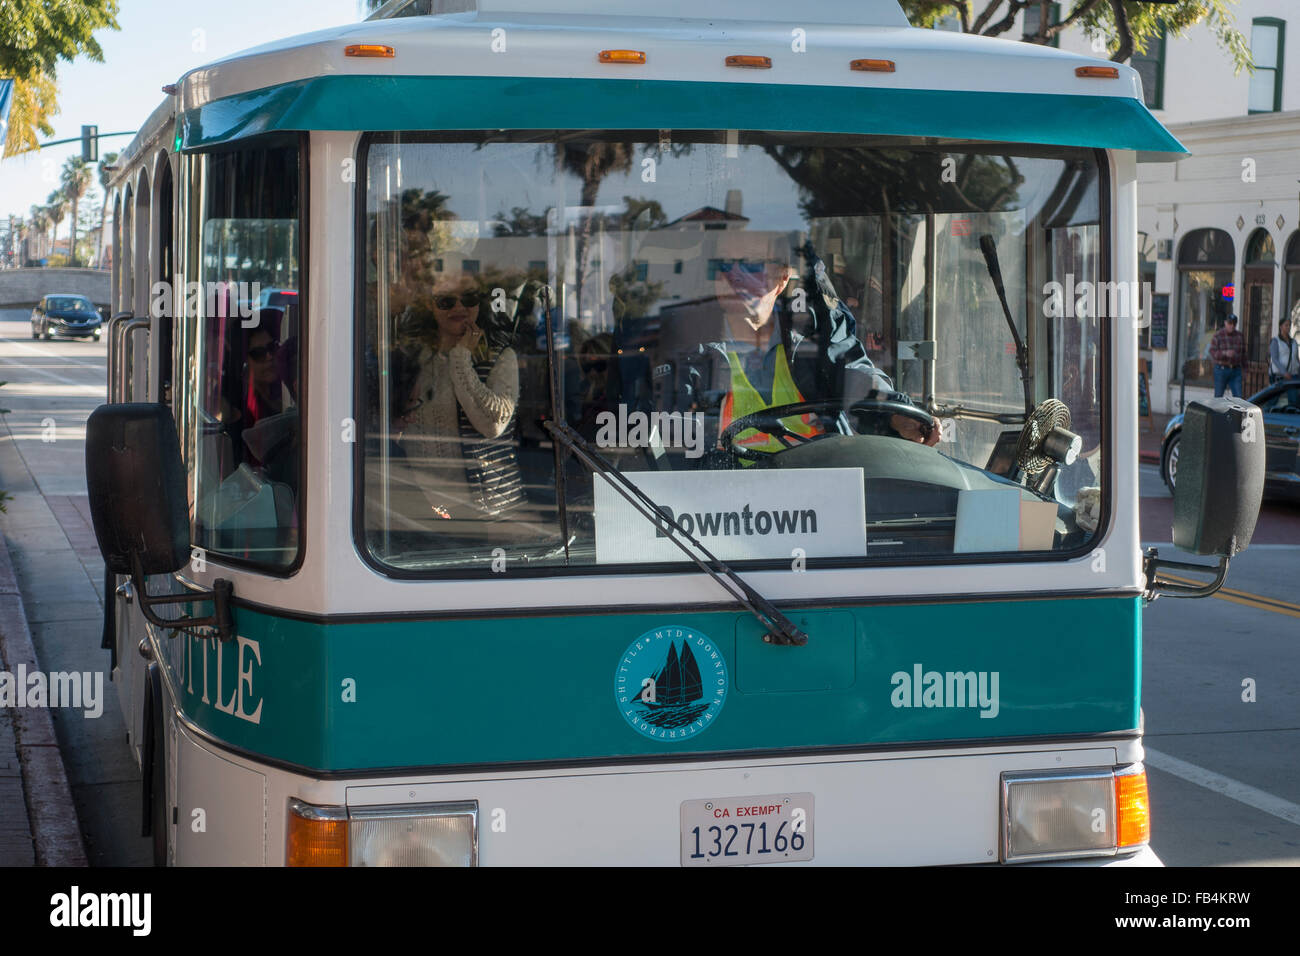 The Santa Barbara Downtown Shuttle. It is a small electric bus that runs up and down State Street, the city's main street. Stock Photo